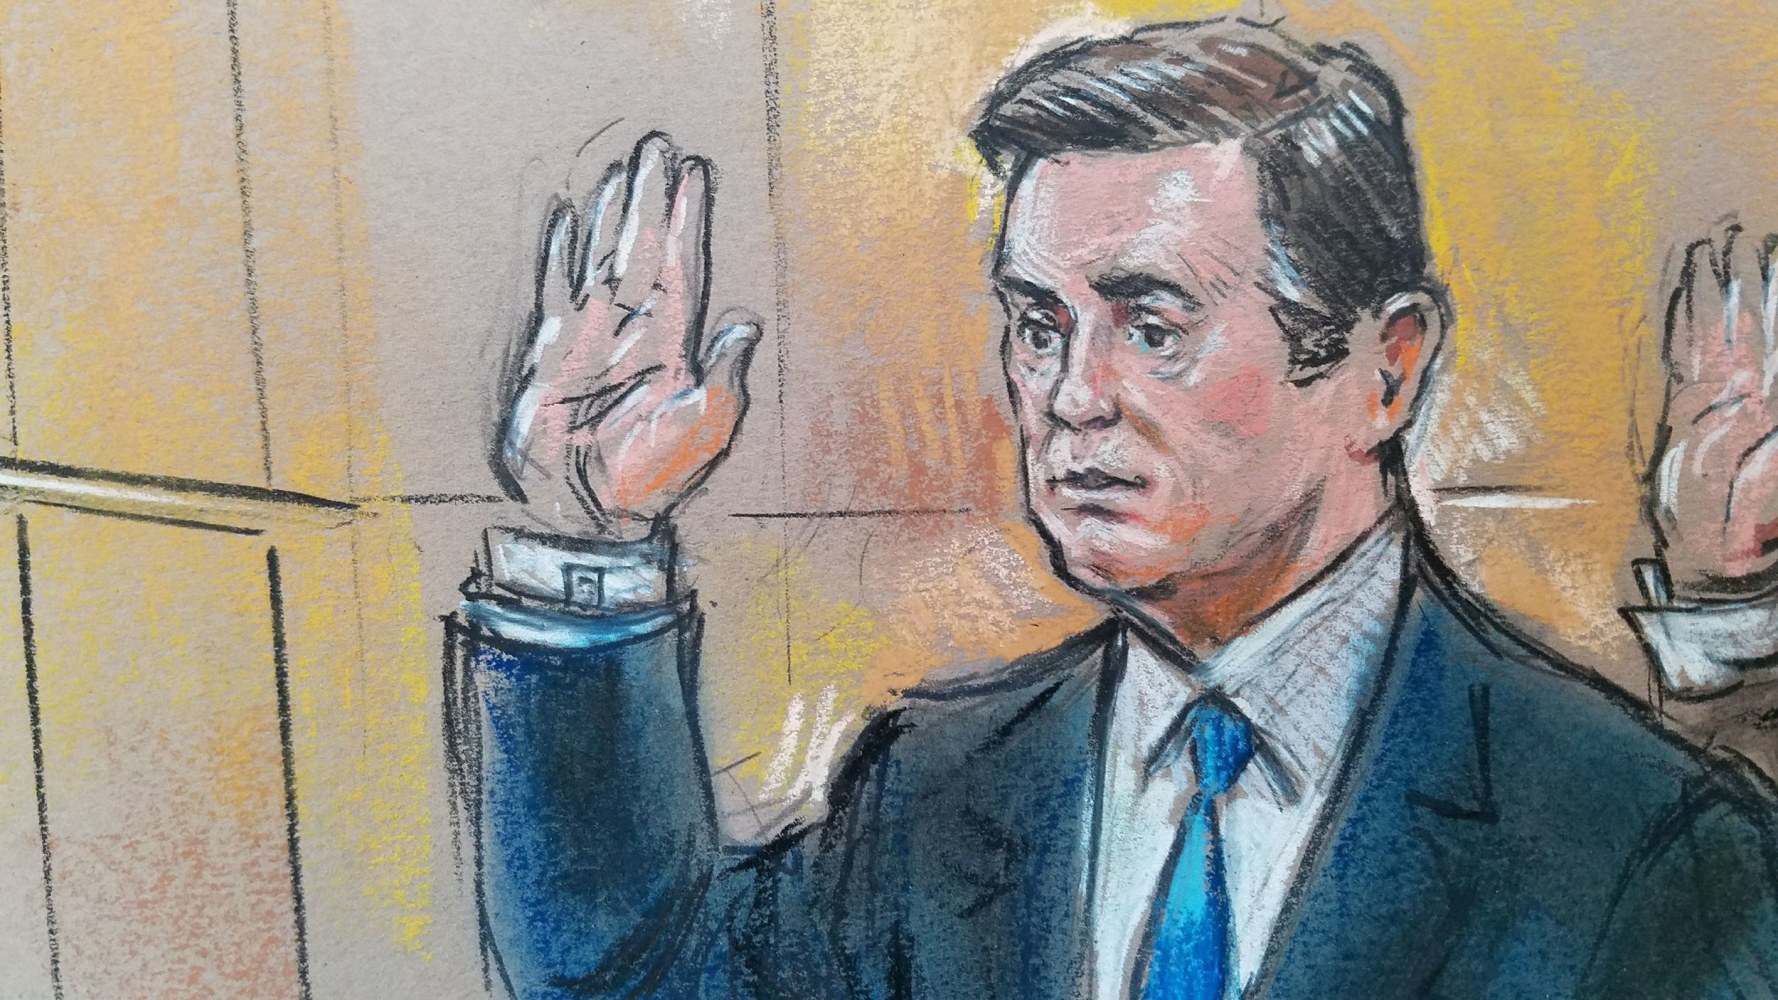 Mueller urges judge to deny Manafort's request to lift house arrest